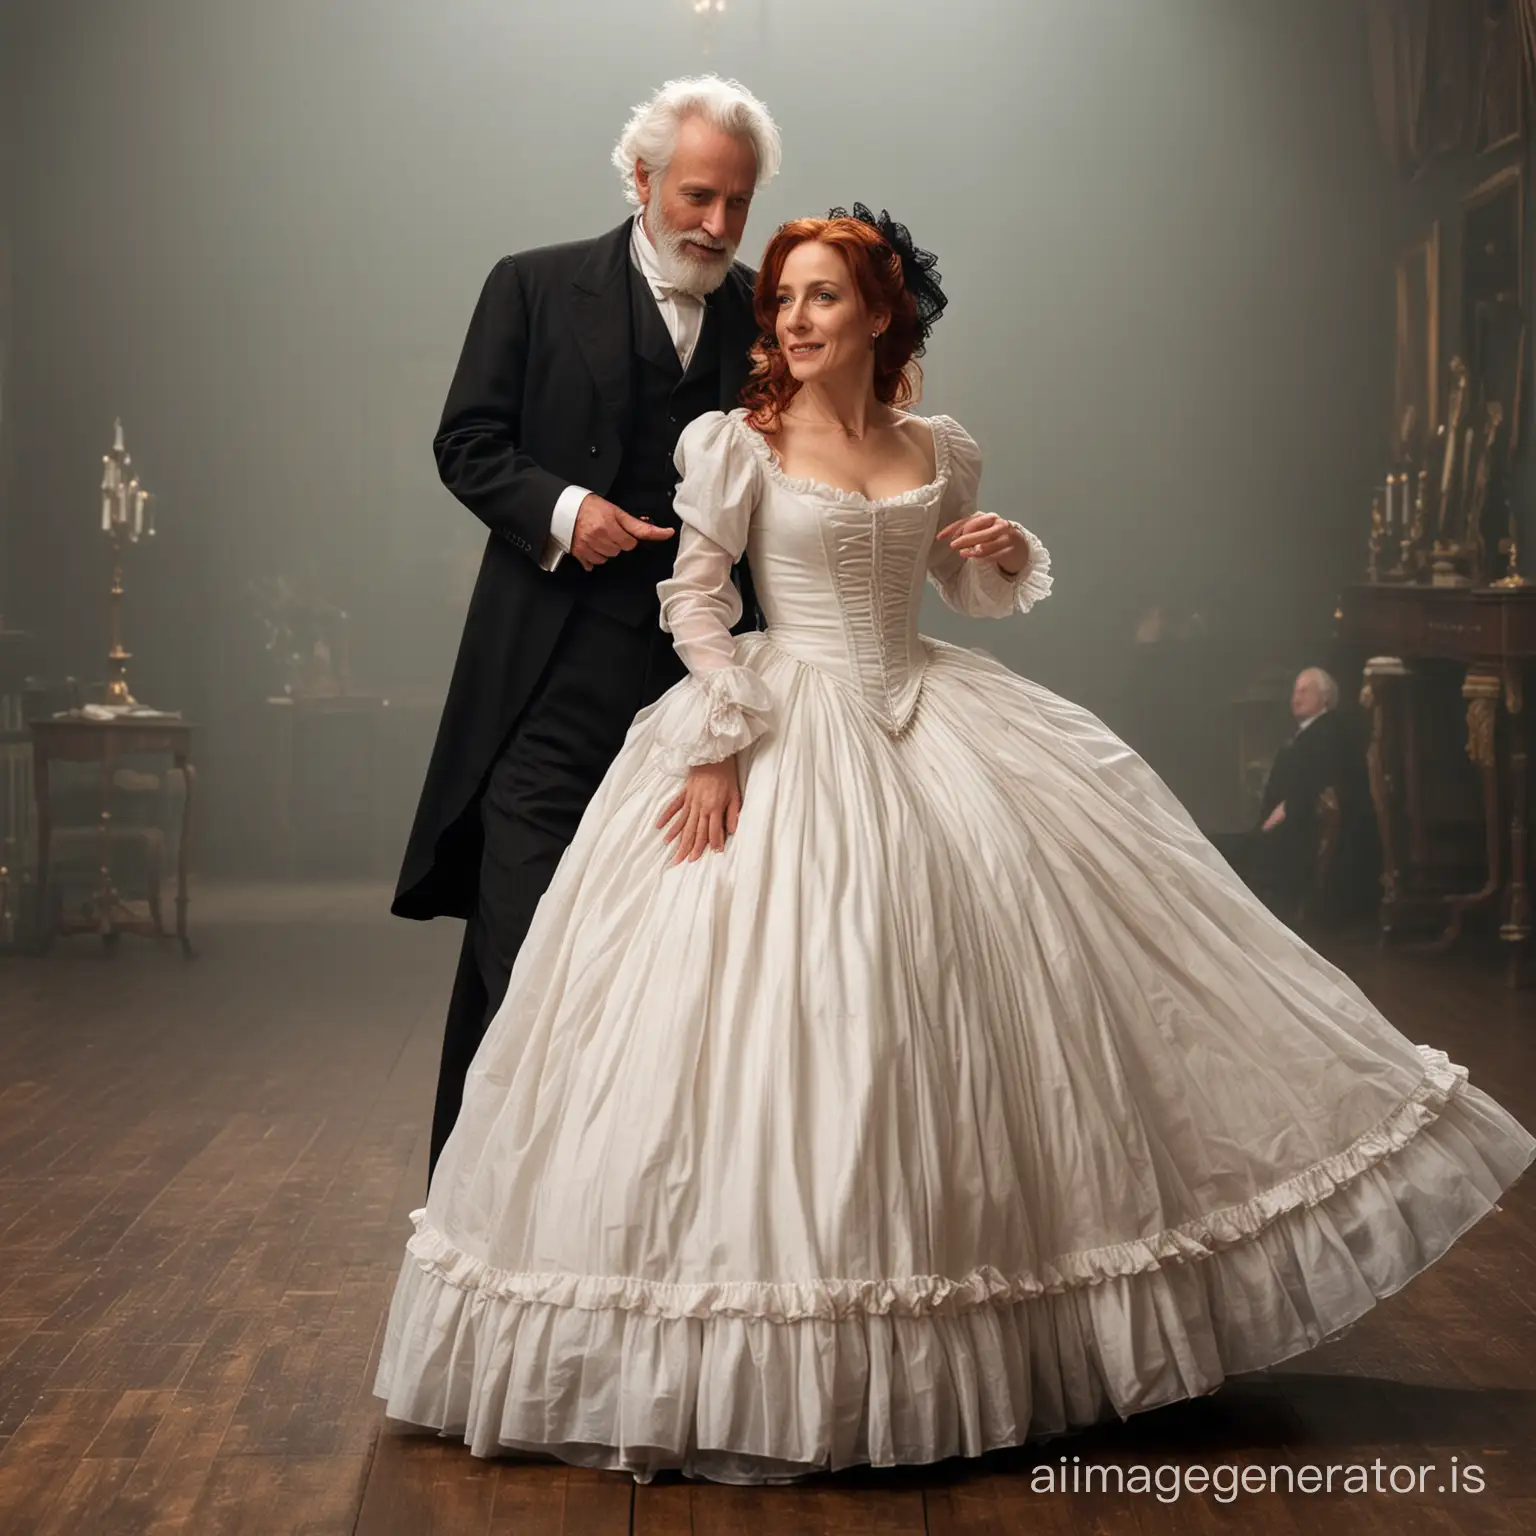 red hair Gillian Anderson wearing a dark brown floor-length loose billowing 1860 victorian crinoline poofy dress with a frilly bonnet dancing with an old man dressed into a black victorian suit who seems to be her newlywed husband